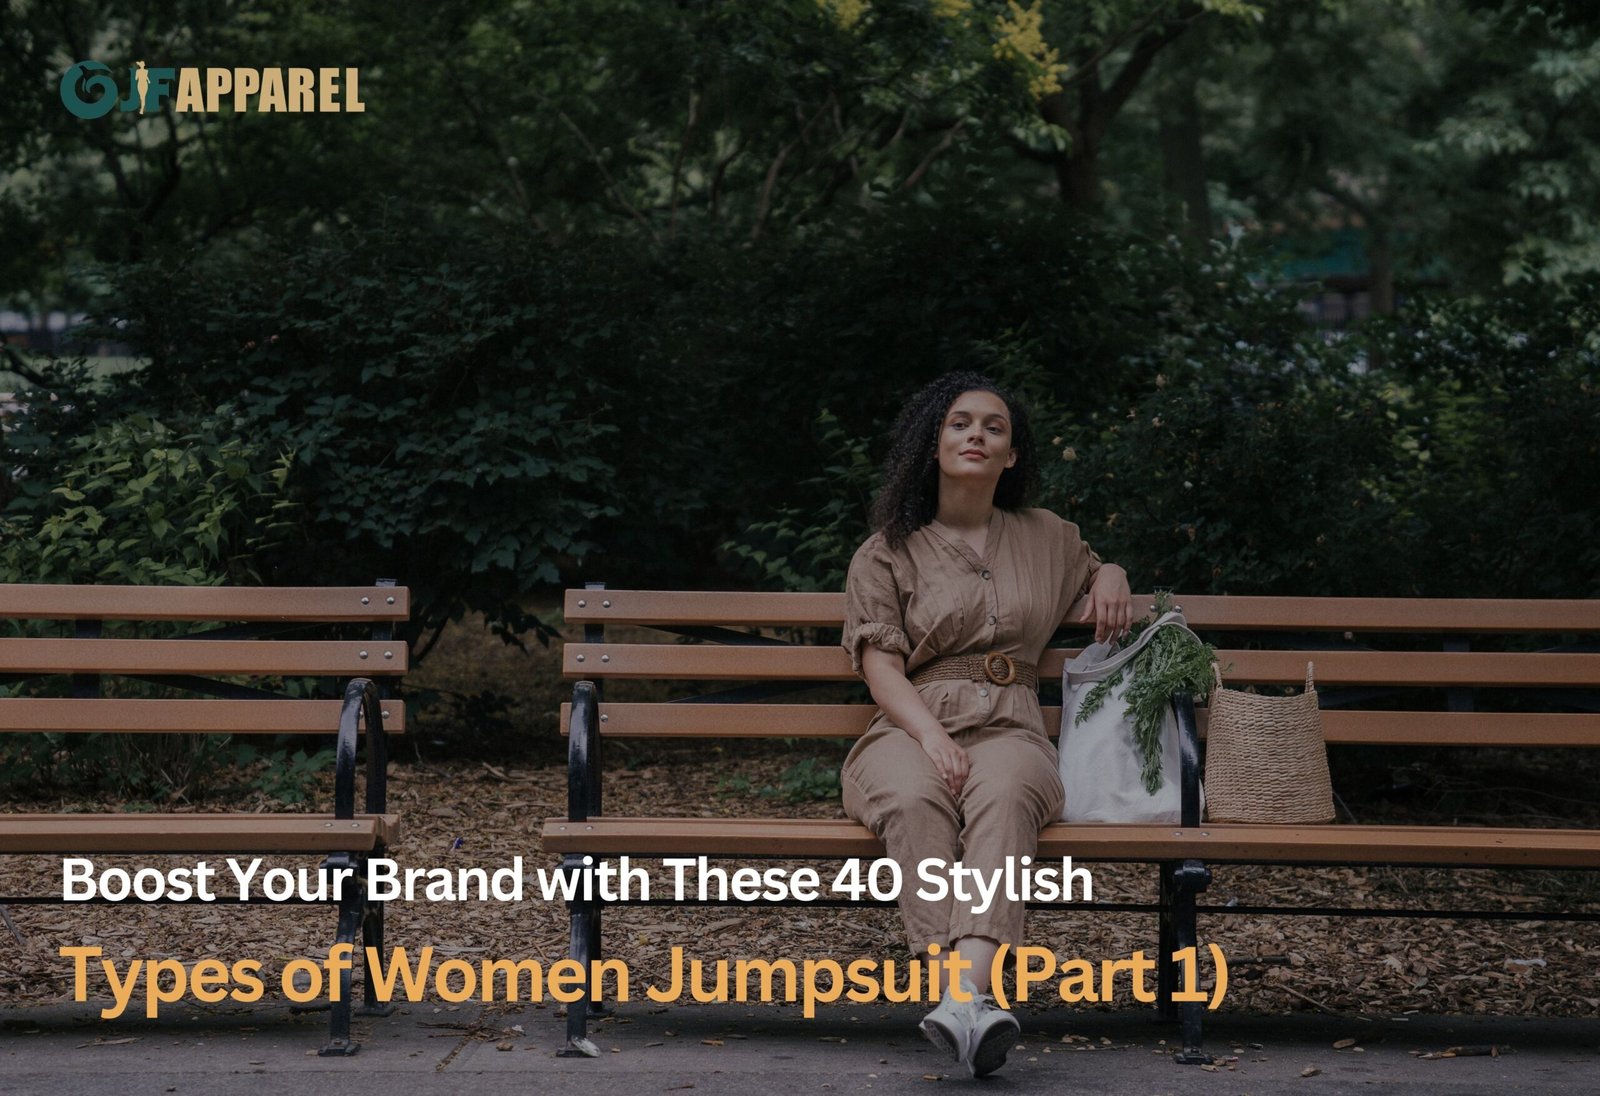 Boost Your Brand with These 40 Stylish Types of Women Jumpsuit (Part 1)